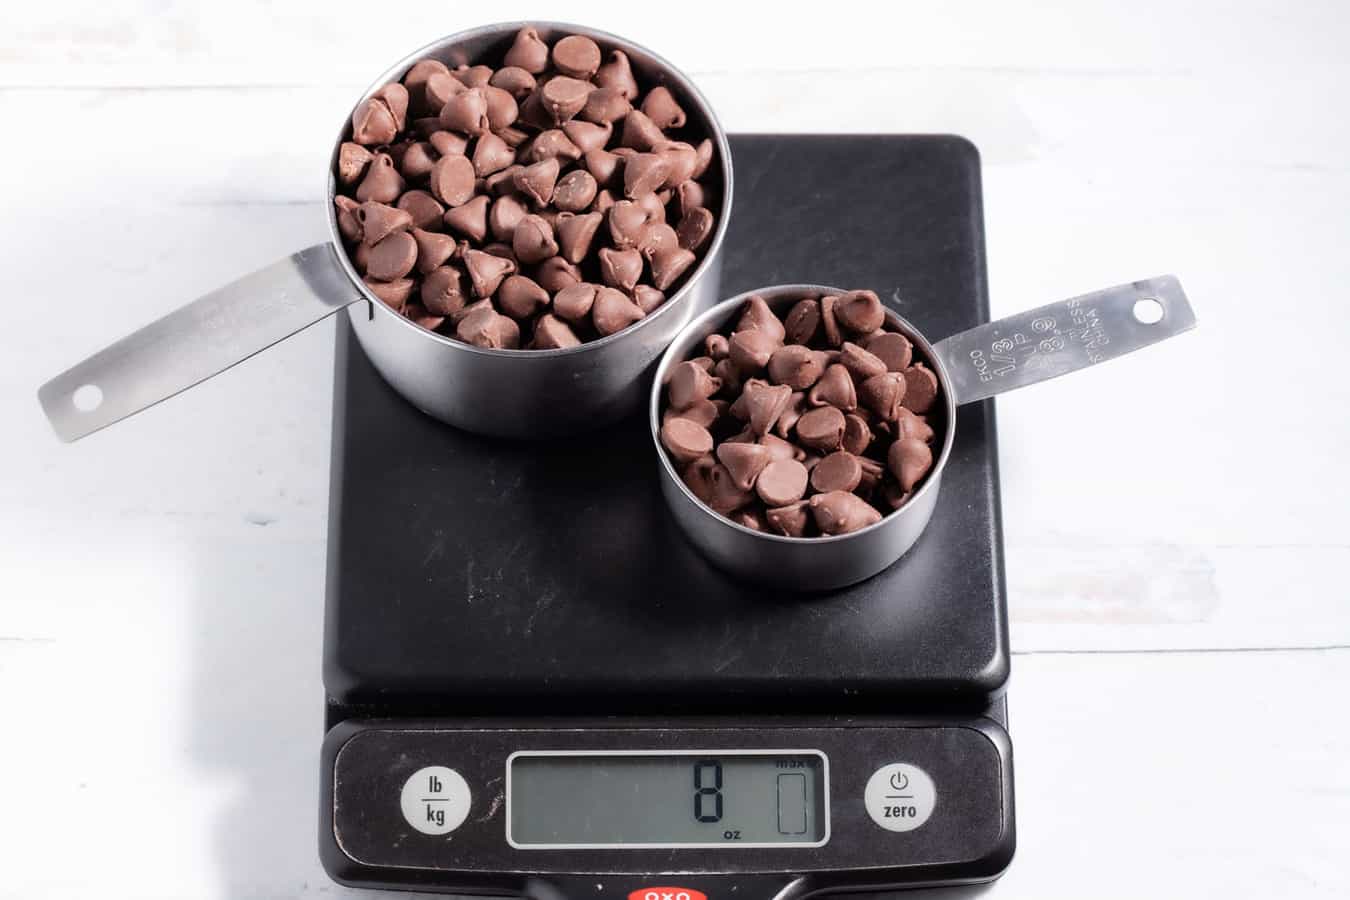 1 ⅓ cups of chocolate chips on a kitchen scale